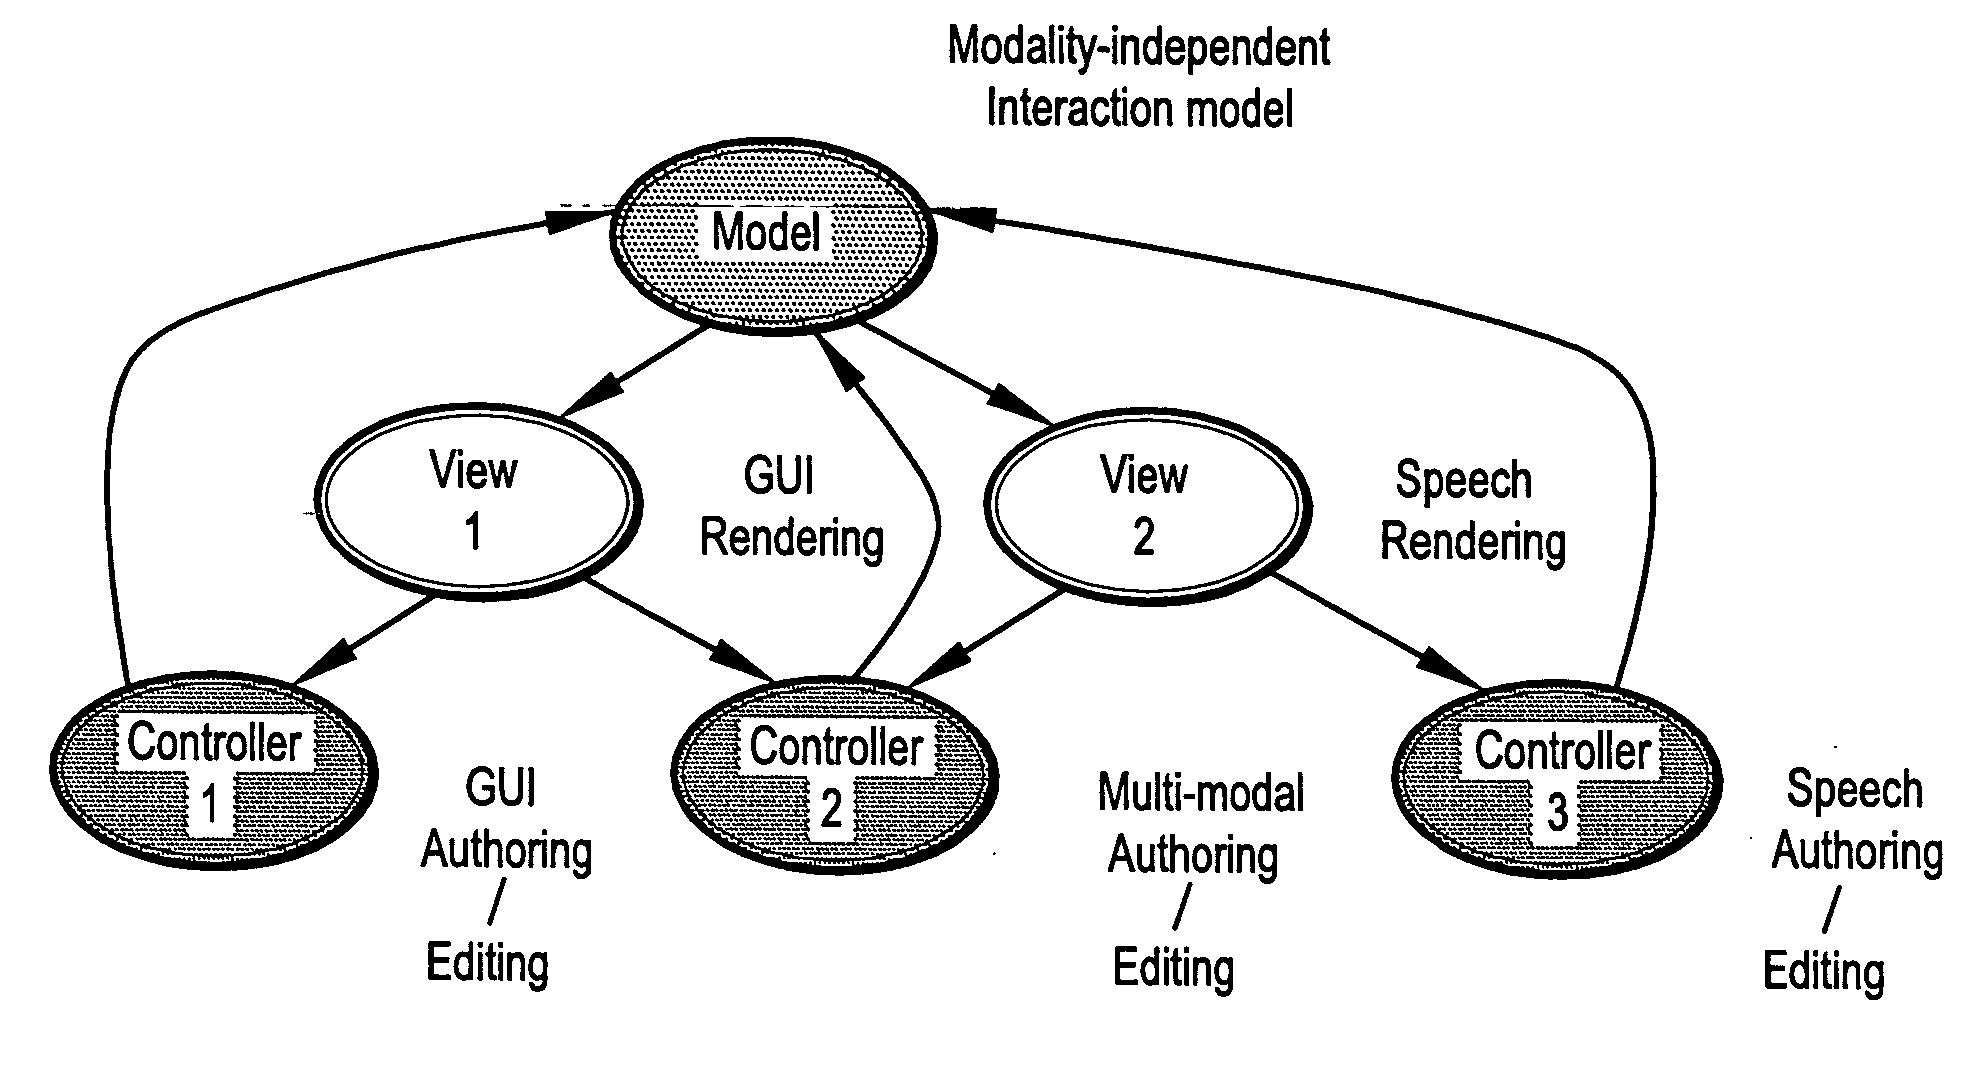 MVC (Model-View-Controller) based multi-modal authoring tool and development environment